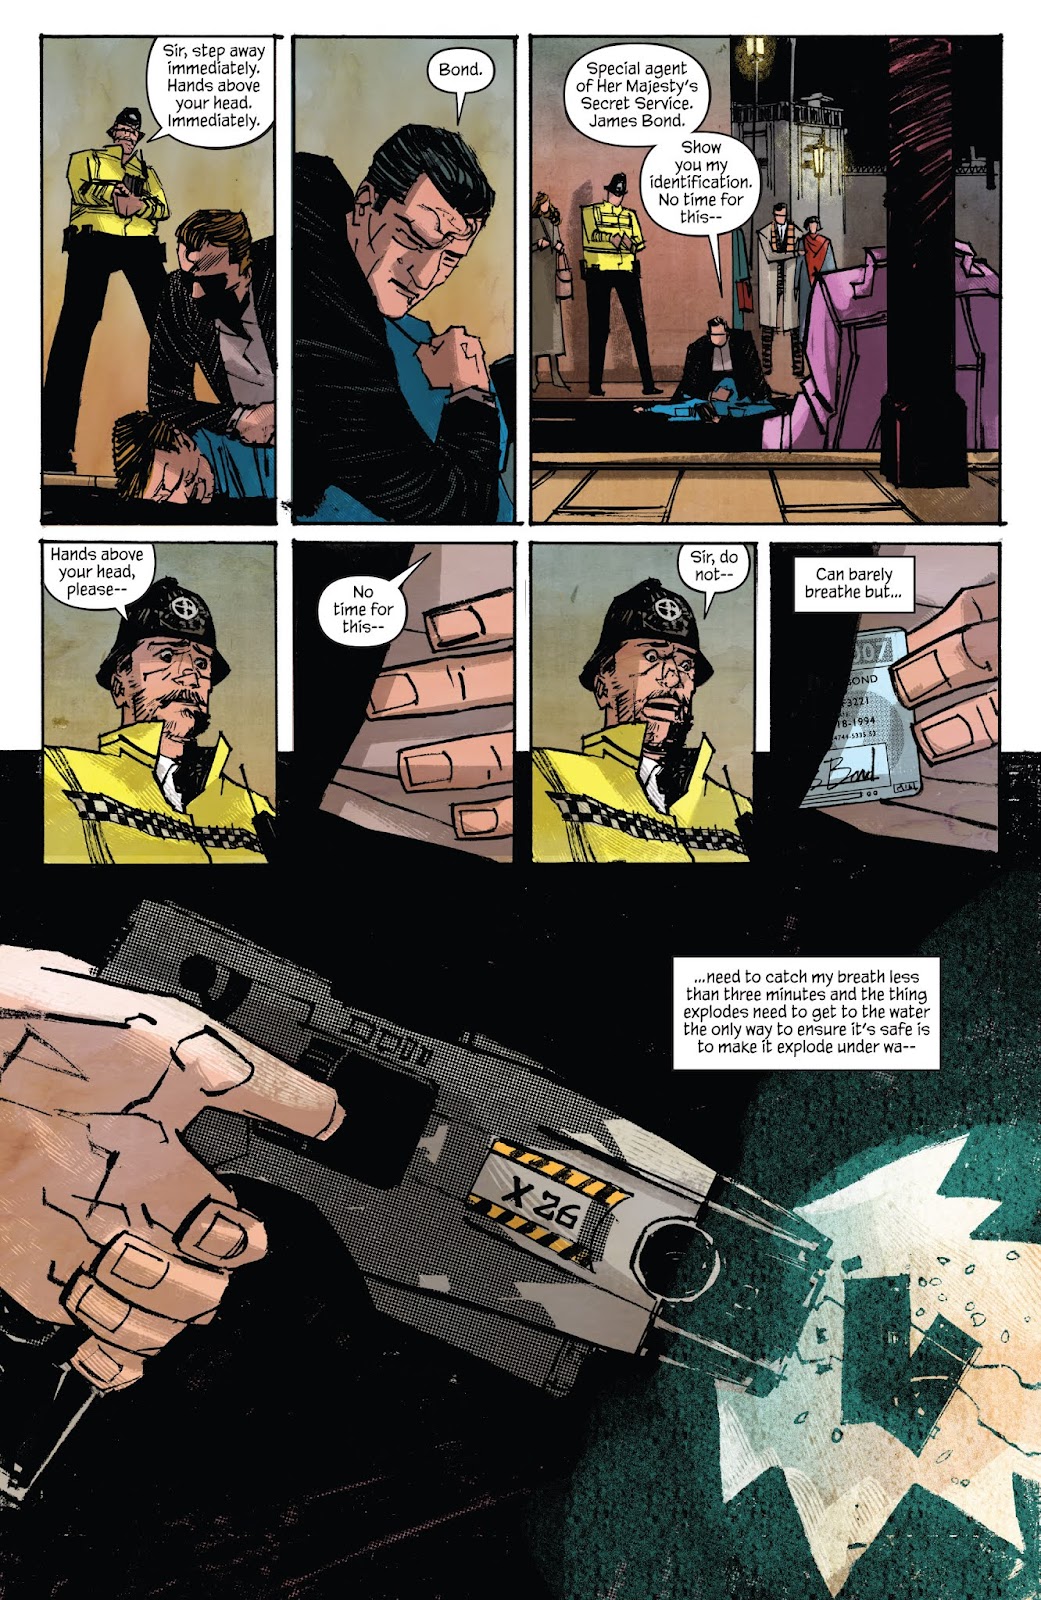 James Bond: The Body issue 5 - Page 13